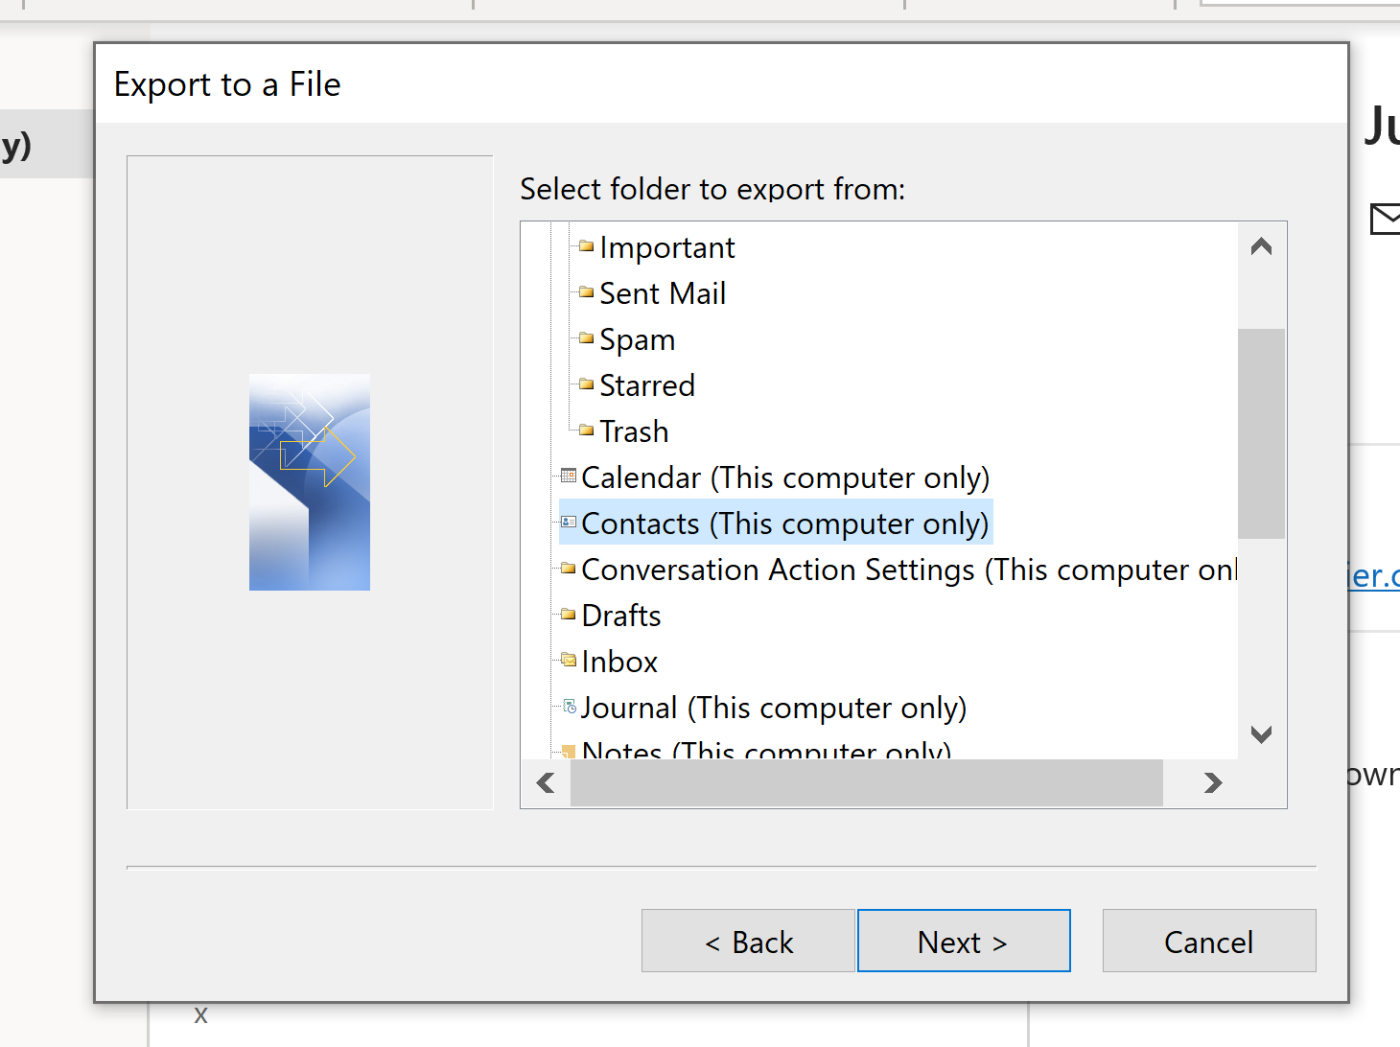 Selecting the folder to export to